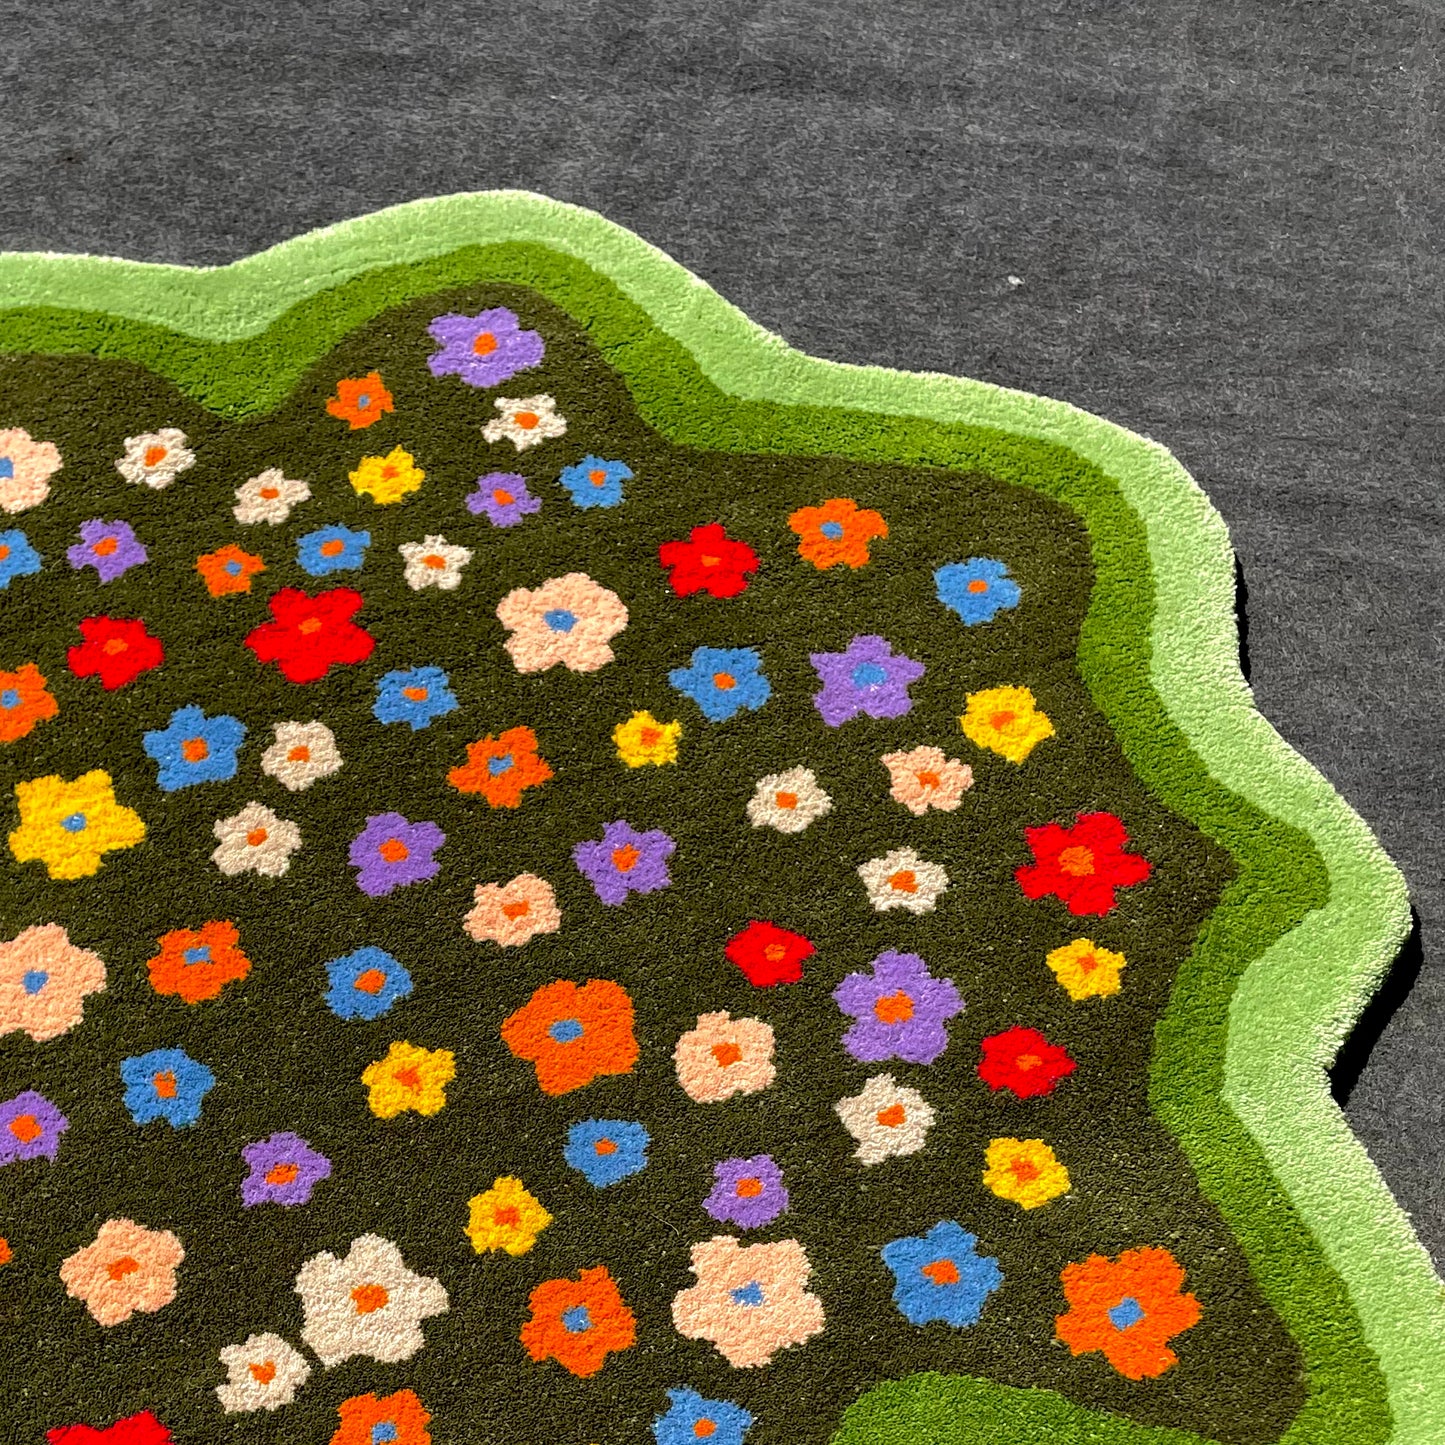 blossom bliss in garden rug close up